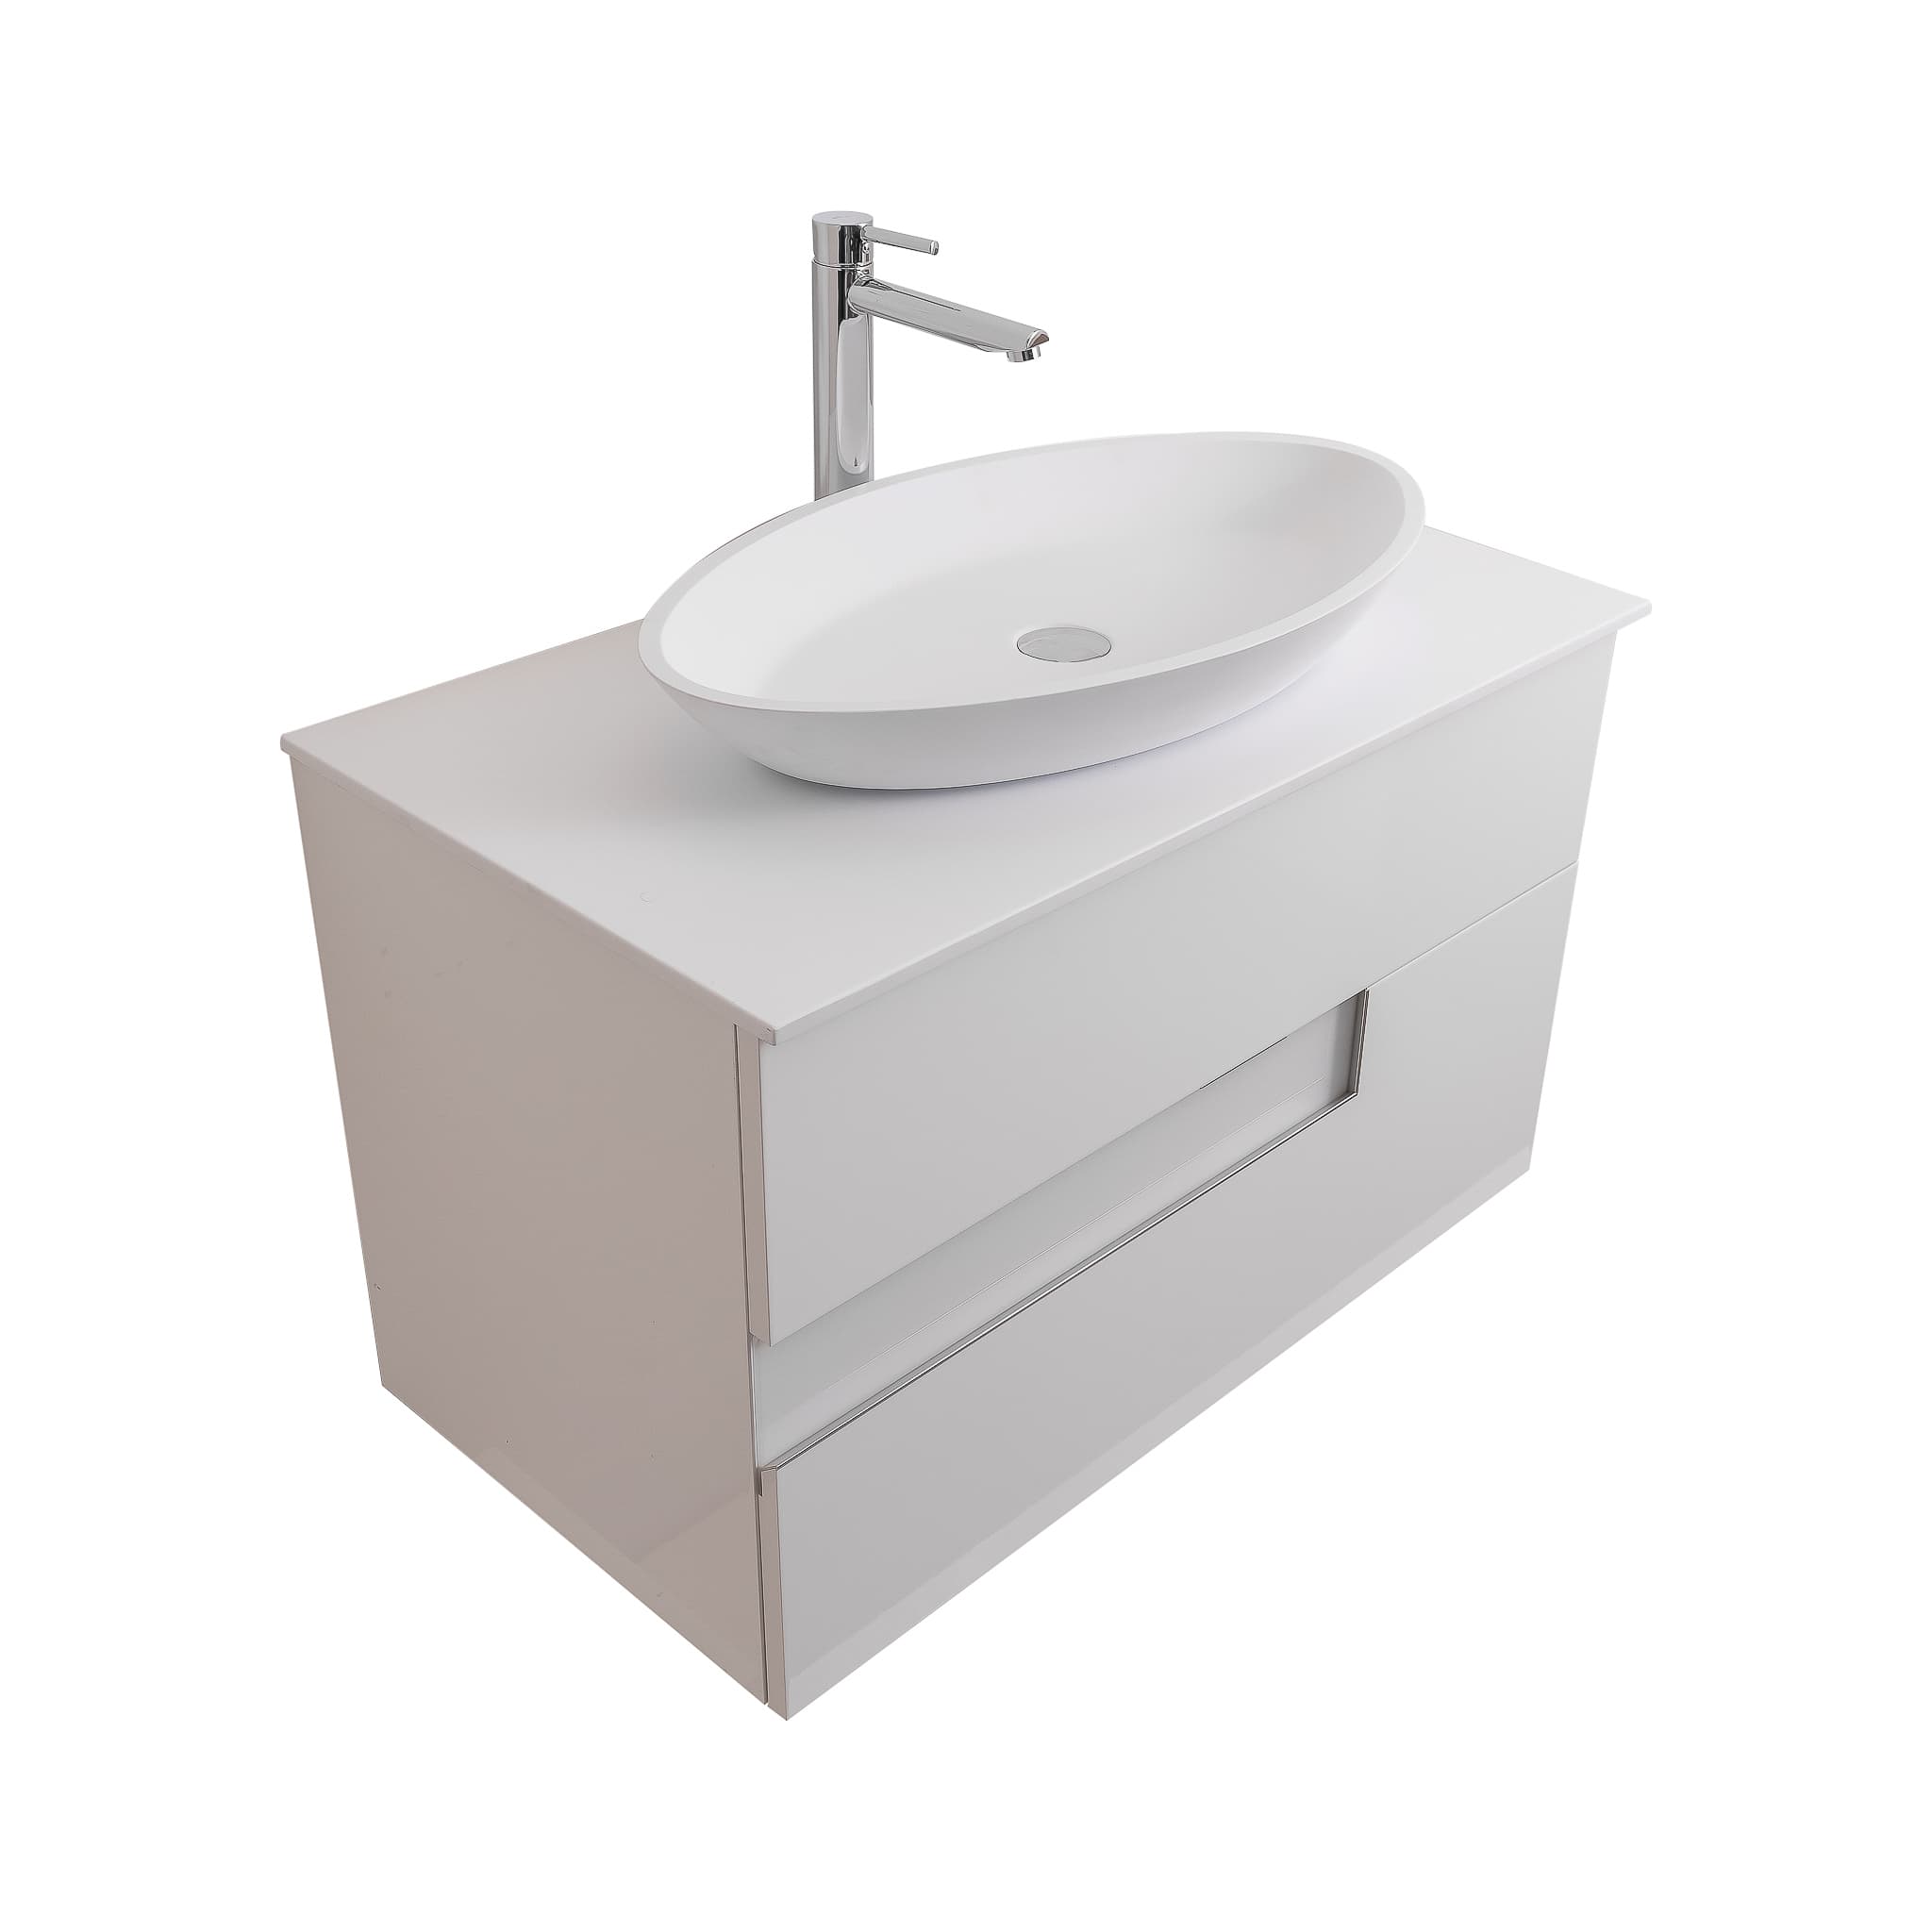 Vision 31.5 White High Gloss Cabinet, Solid Surface Flat White Counter And Oval Solid Surface White Basin 1305, Wall Mounted Modern Vanity Set